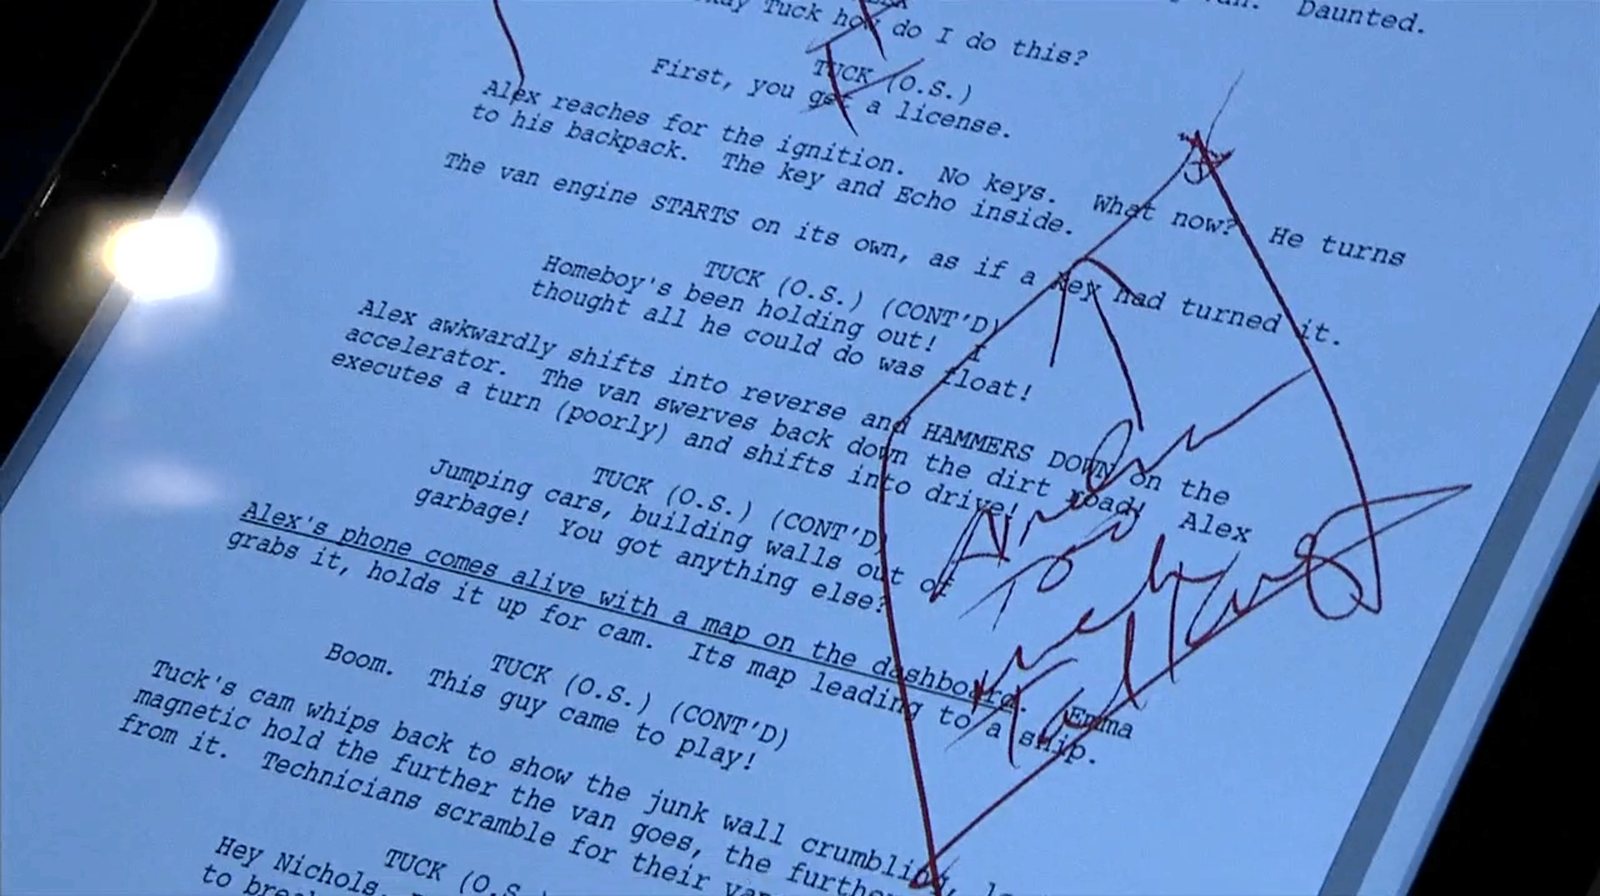 Two lines in the script have red crosses drawn over them, and a box with an arrow encloses a comment on a specific passage.